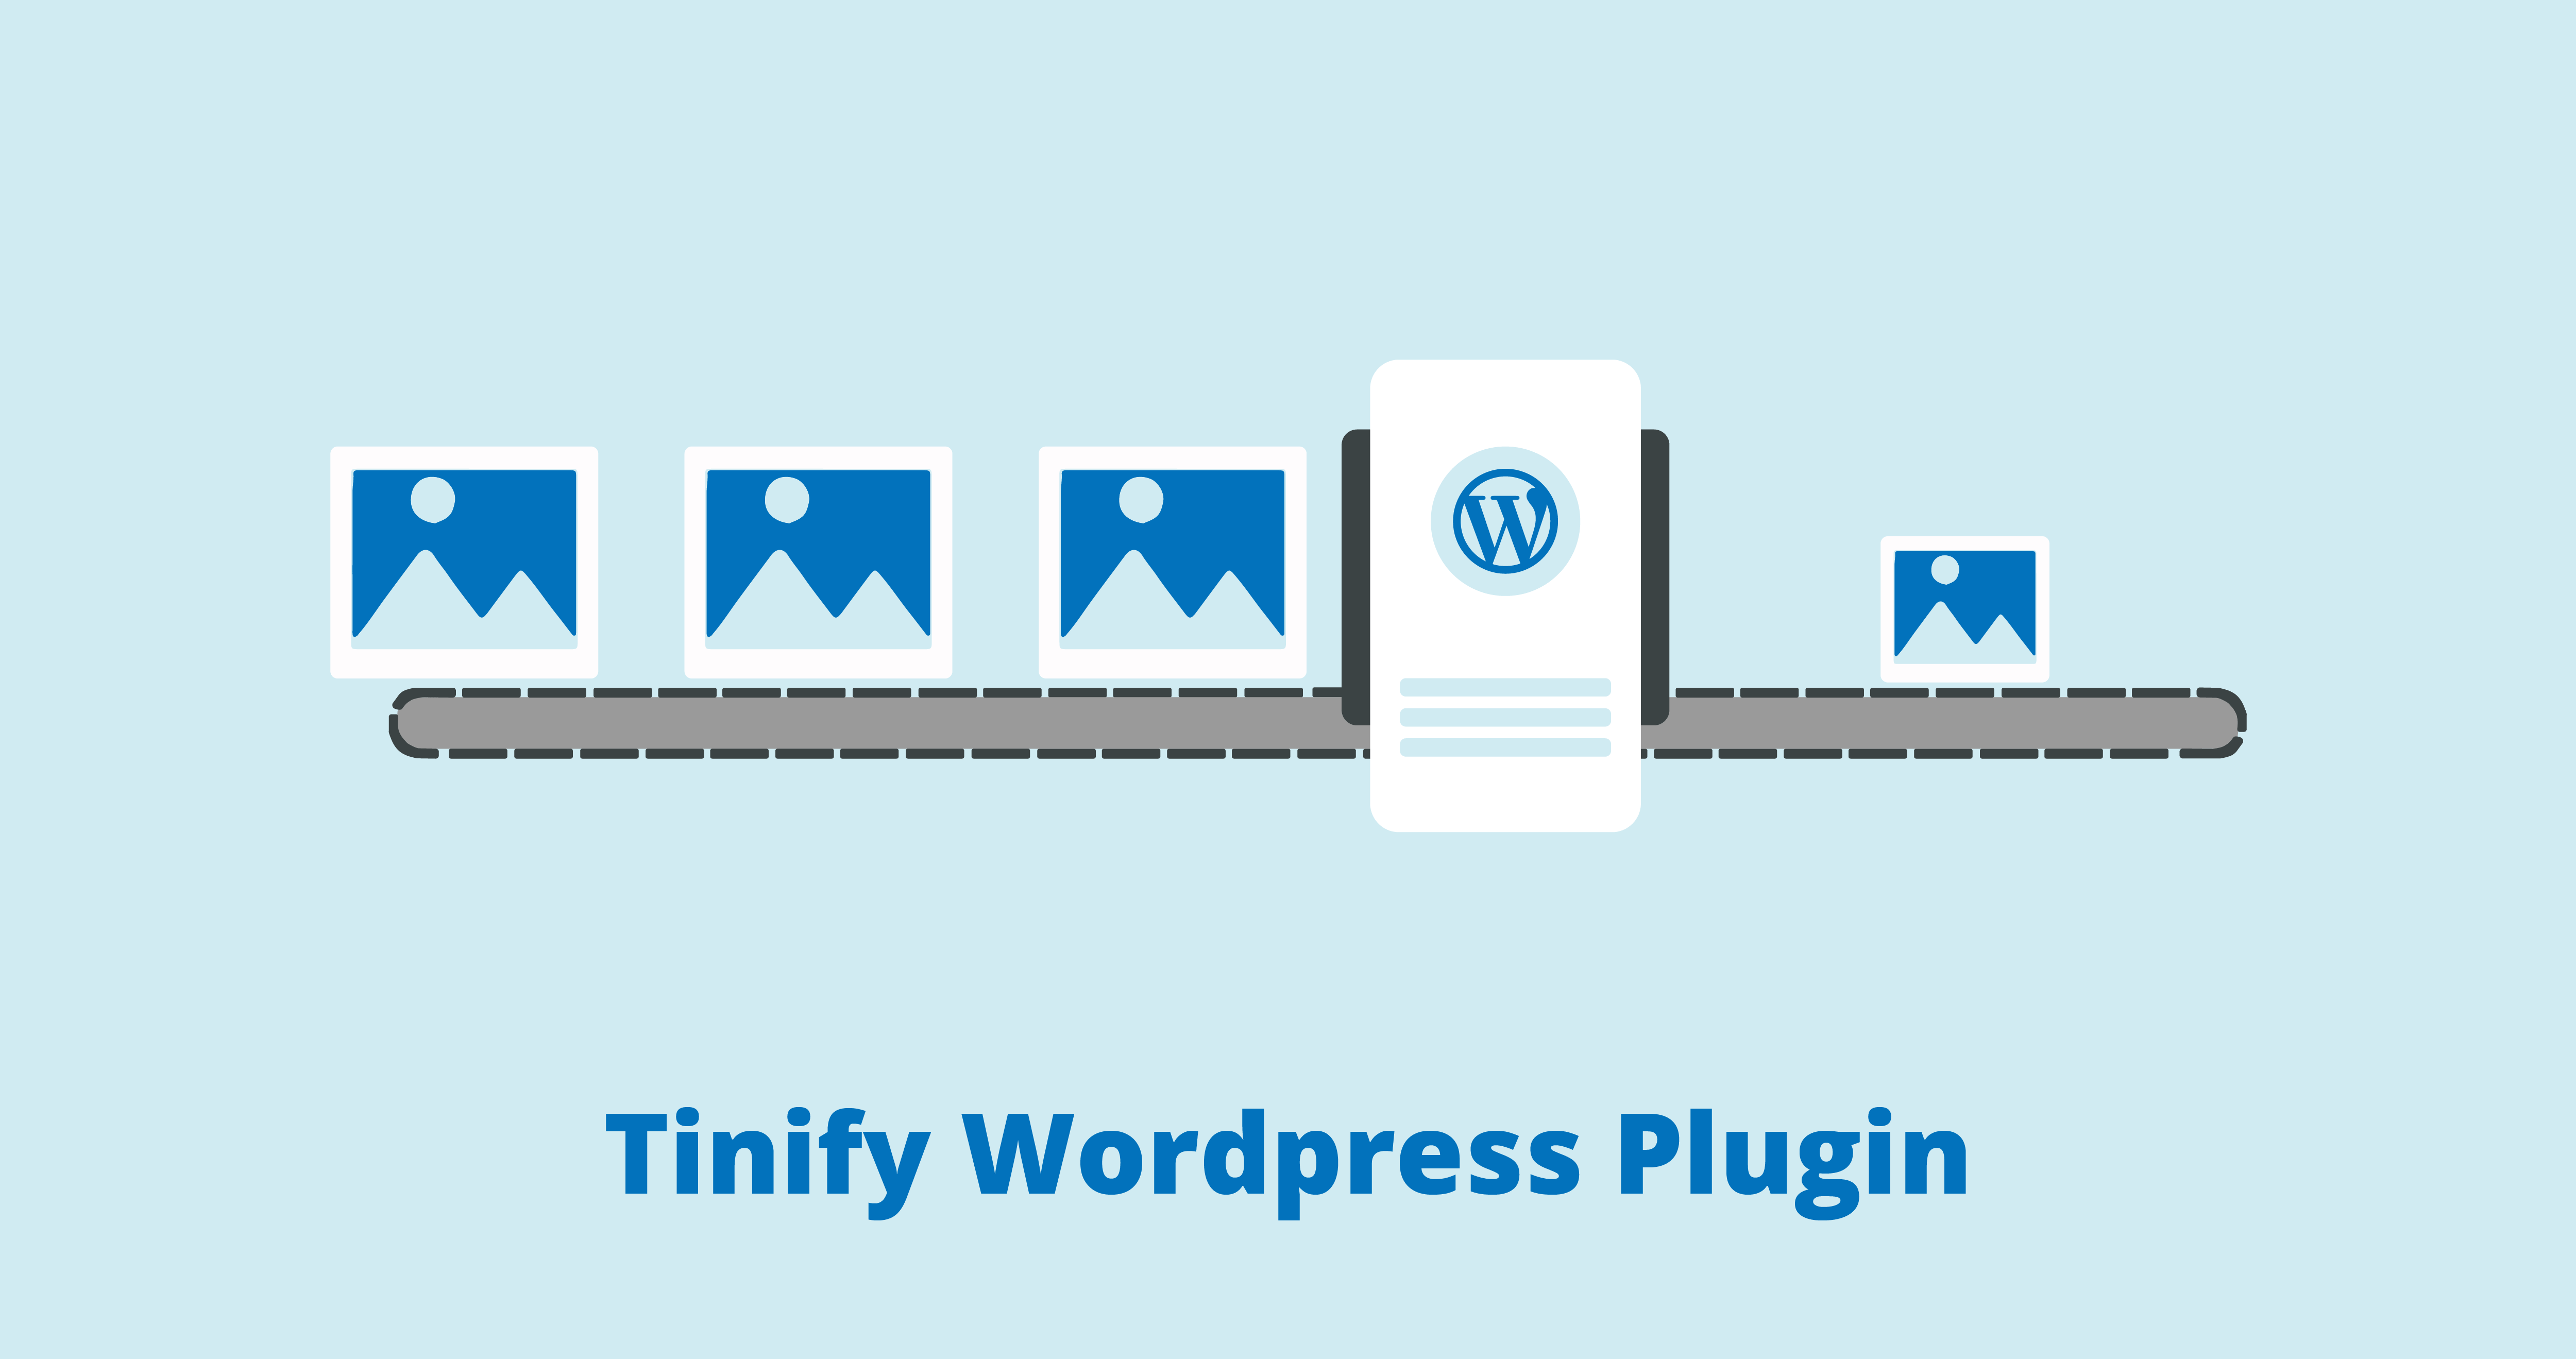 Image compression plugin: Better images with Tinify WordPress Plugin